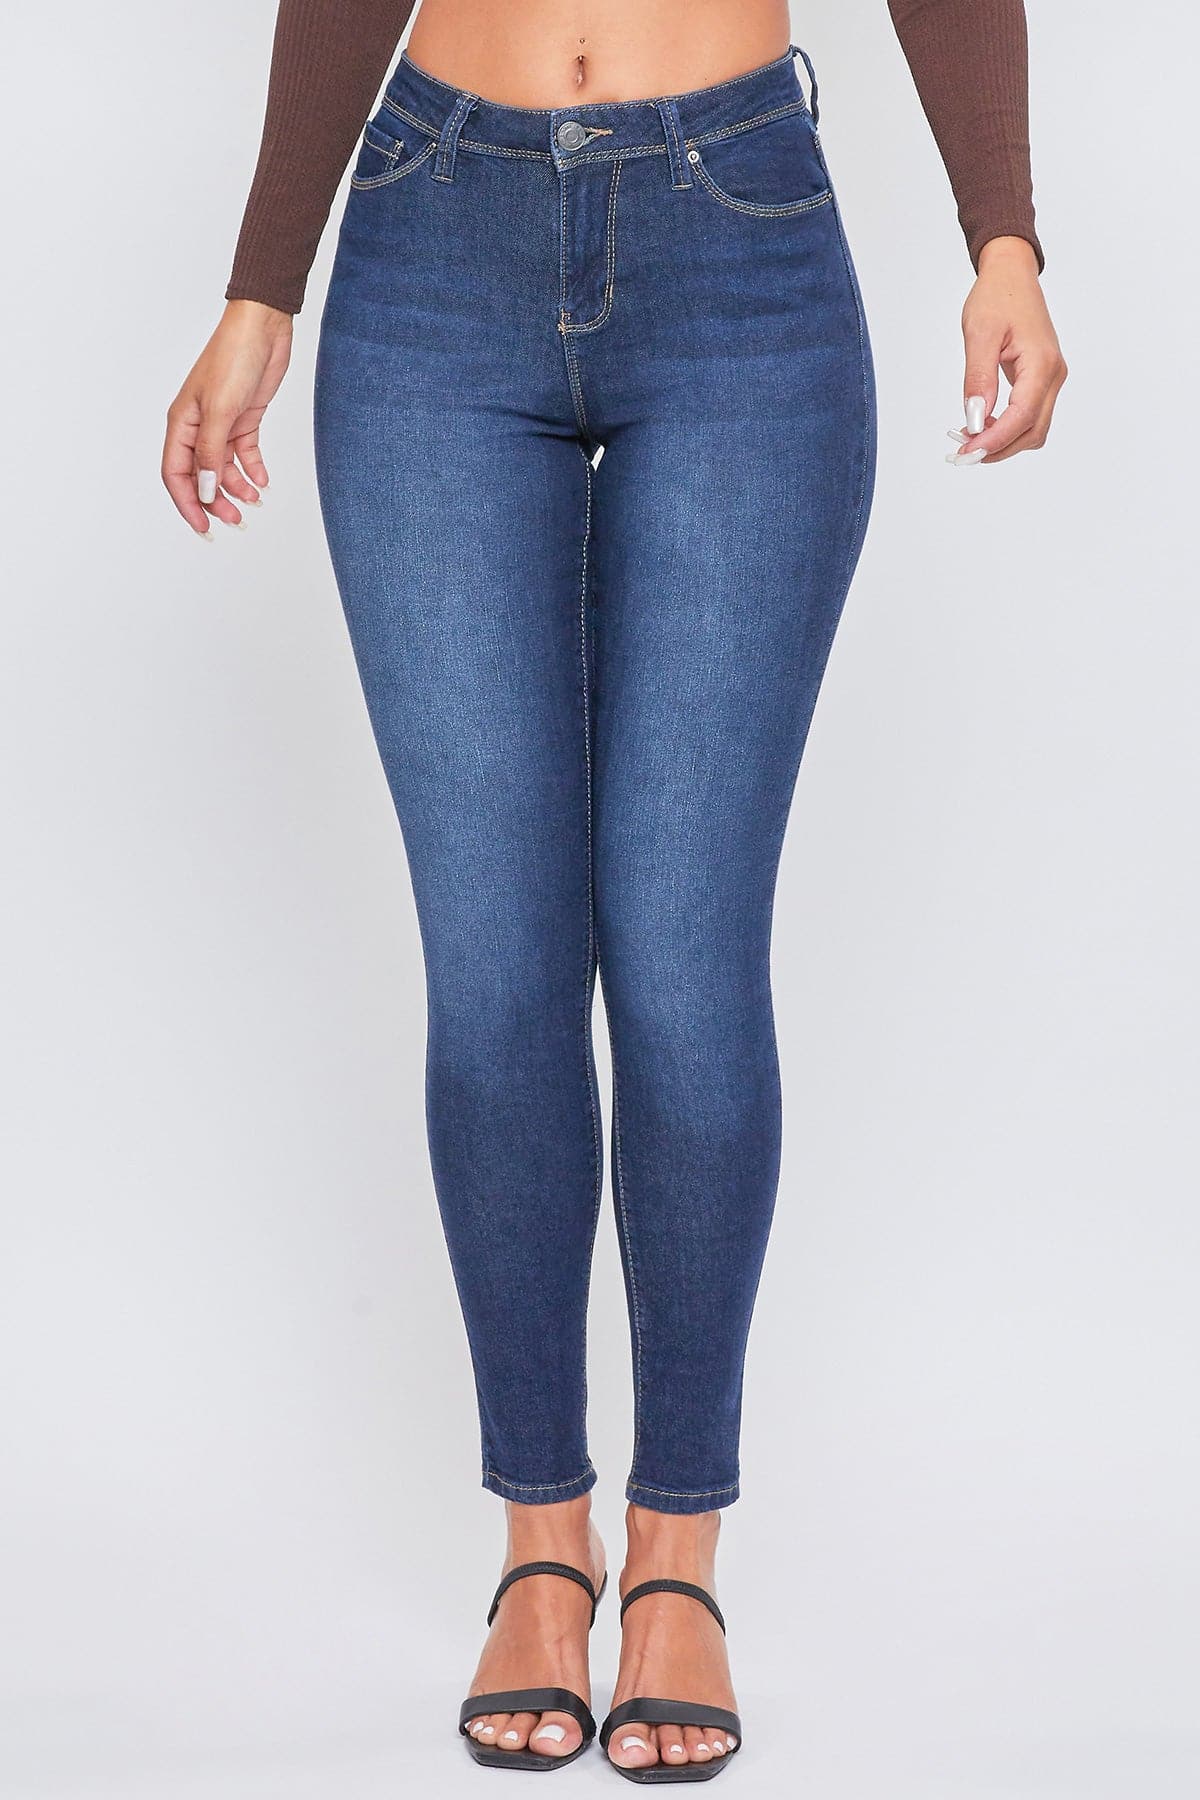 Women's Sustainable Essential Skinny Jeans from YMI – YMI JEANS